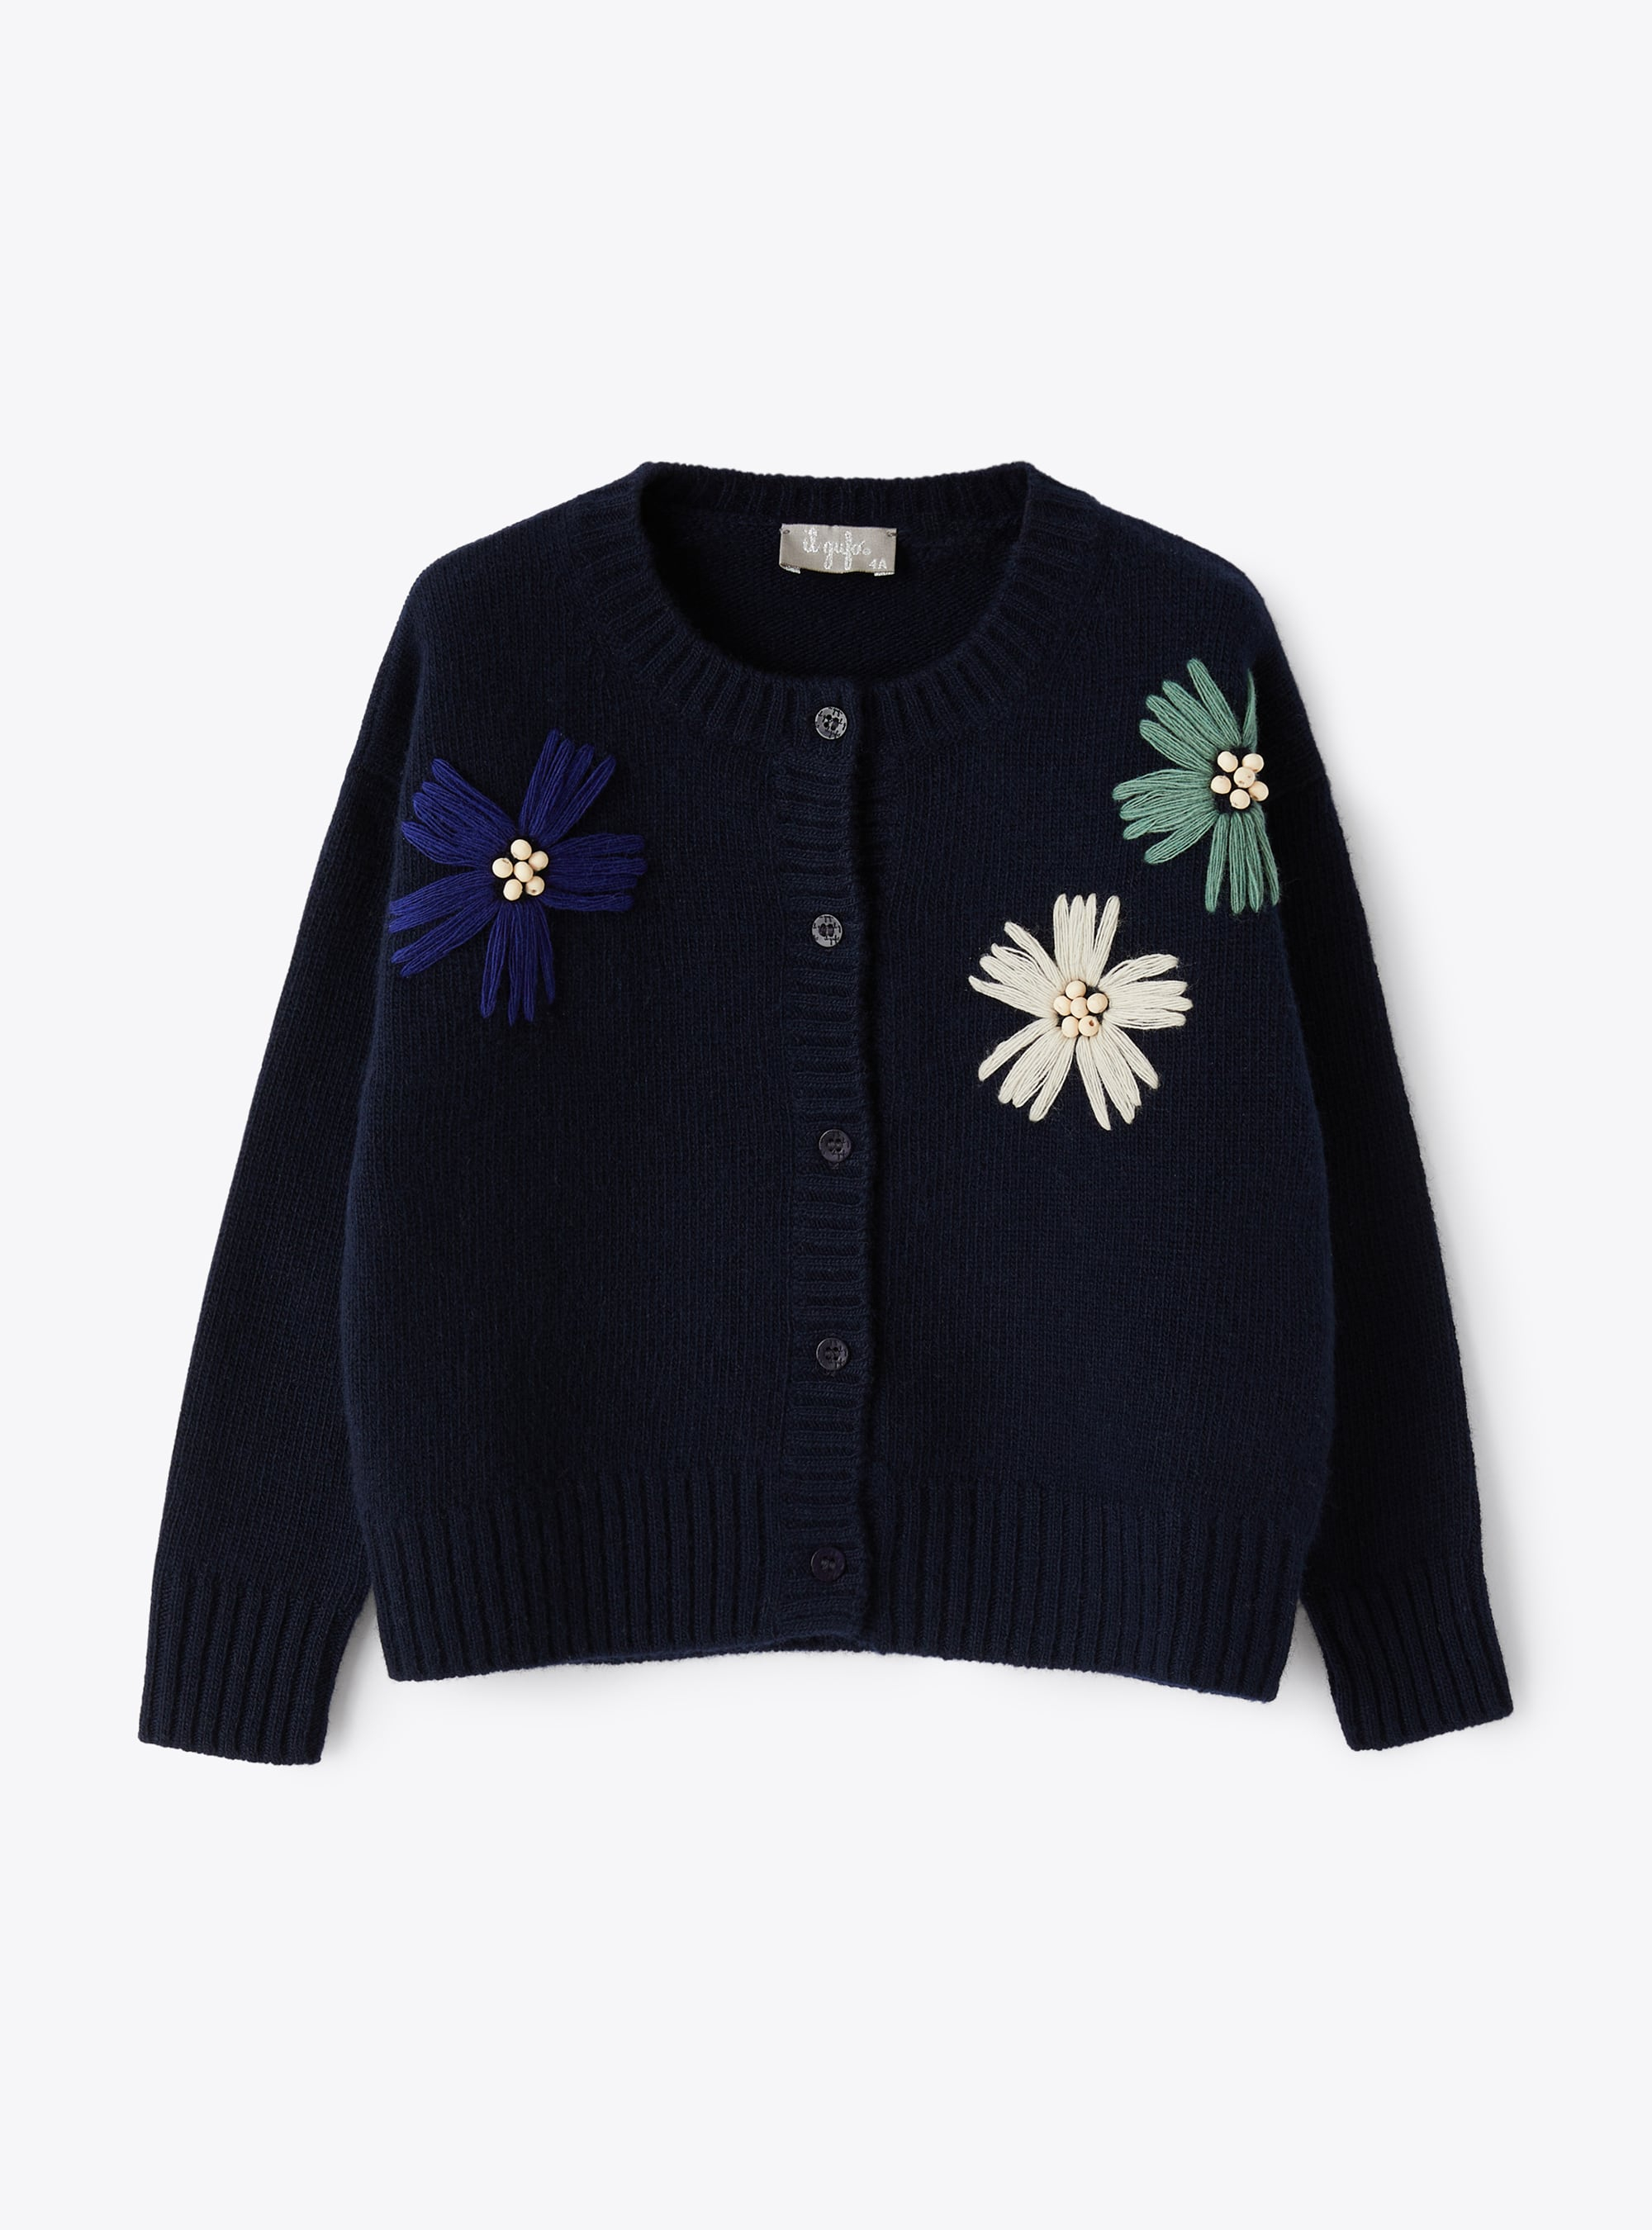 Navy wool cardigan with embroidered flowers - Sweaters - Il Gufo